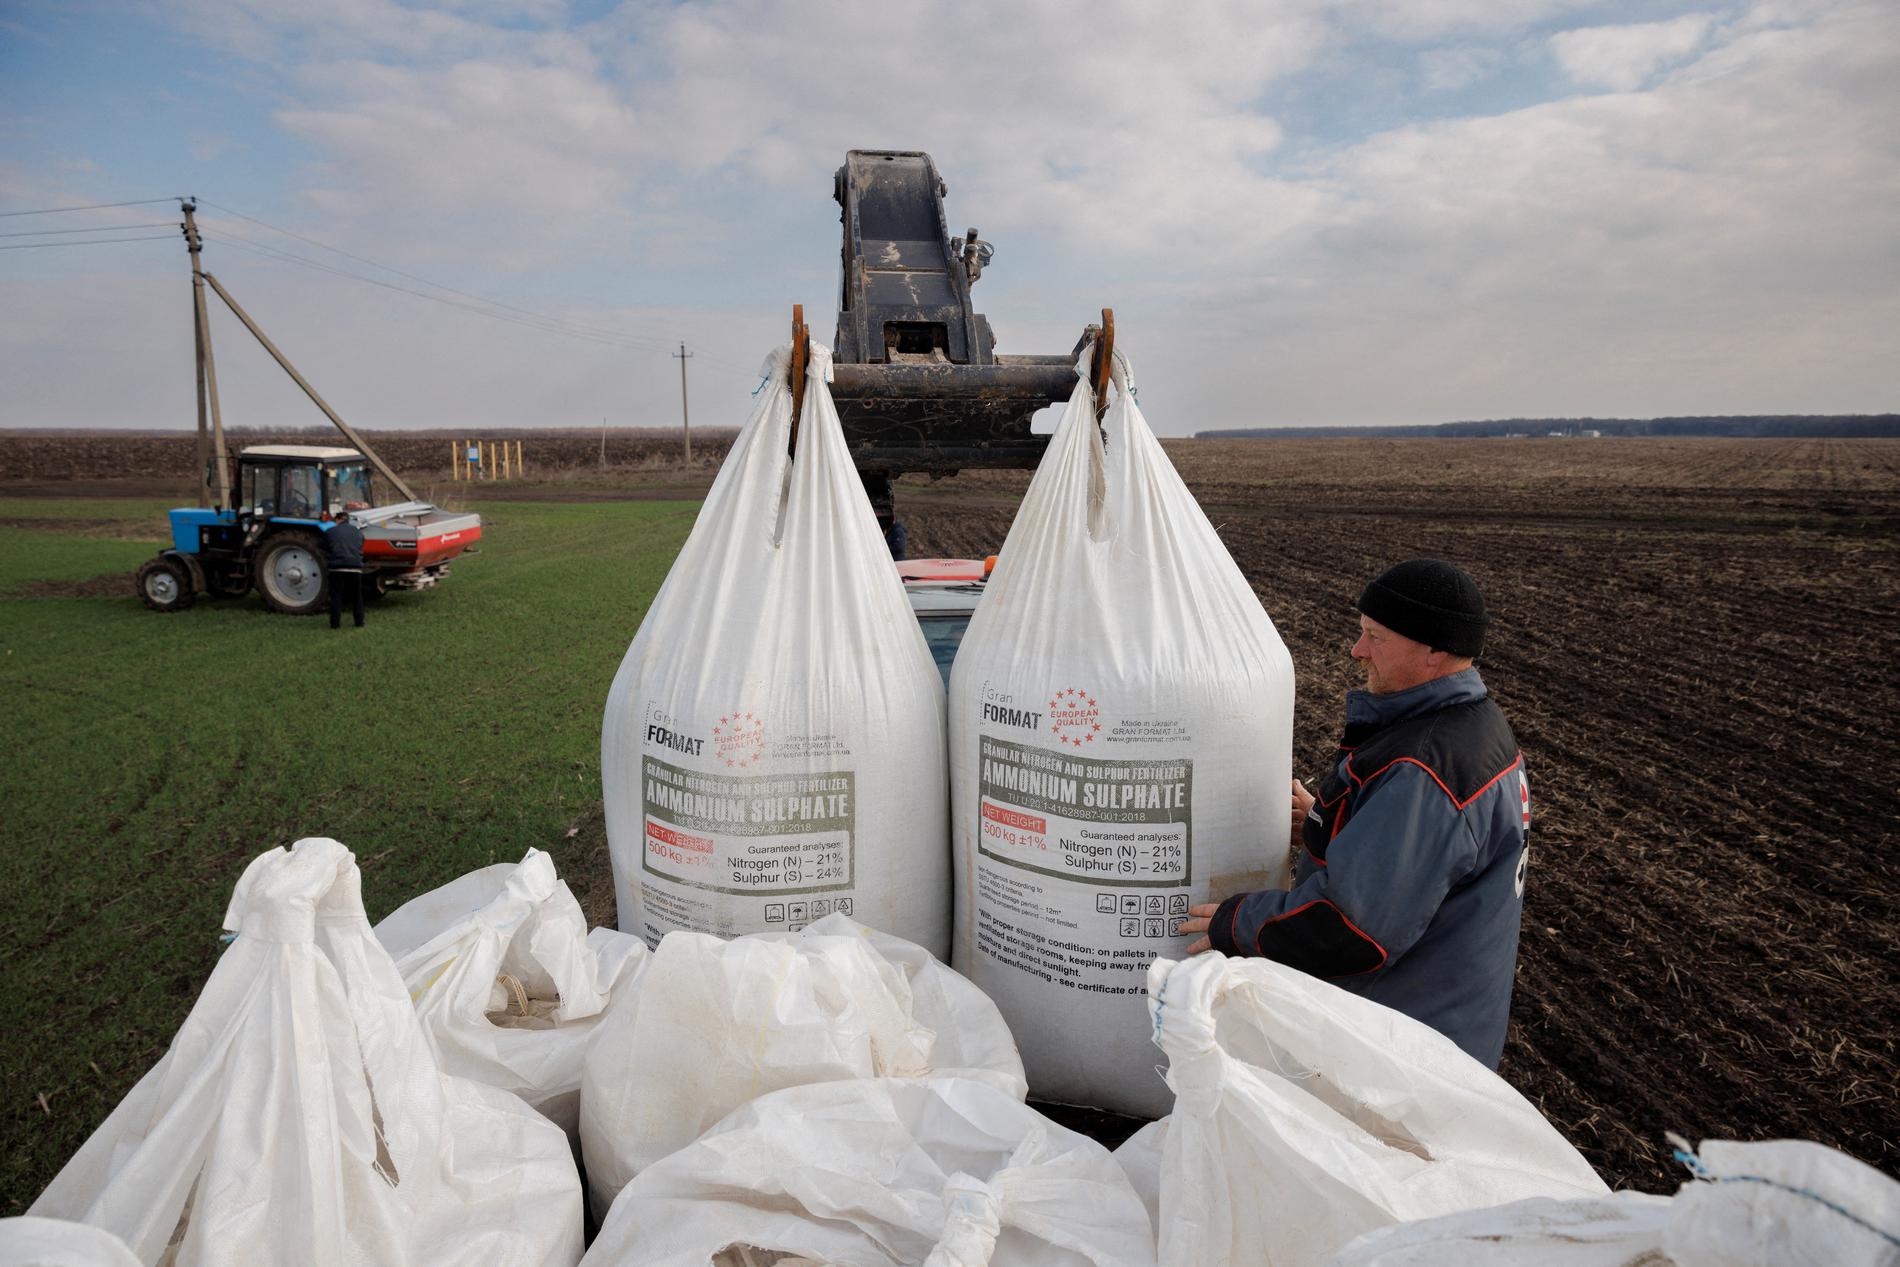 Some media use wrong figures about grain production in Ukraine – VG